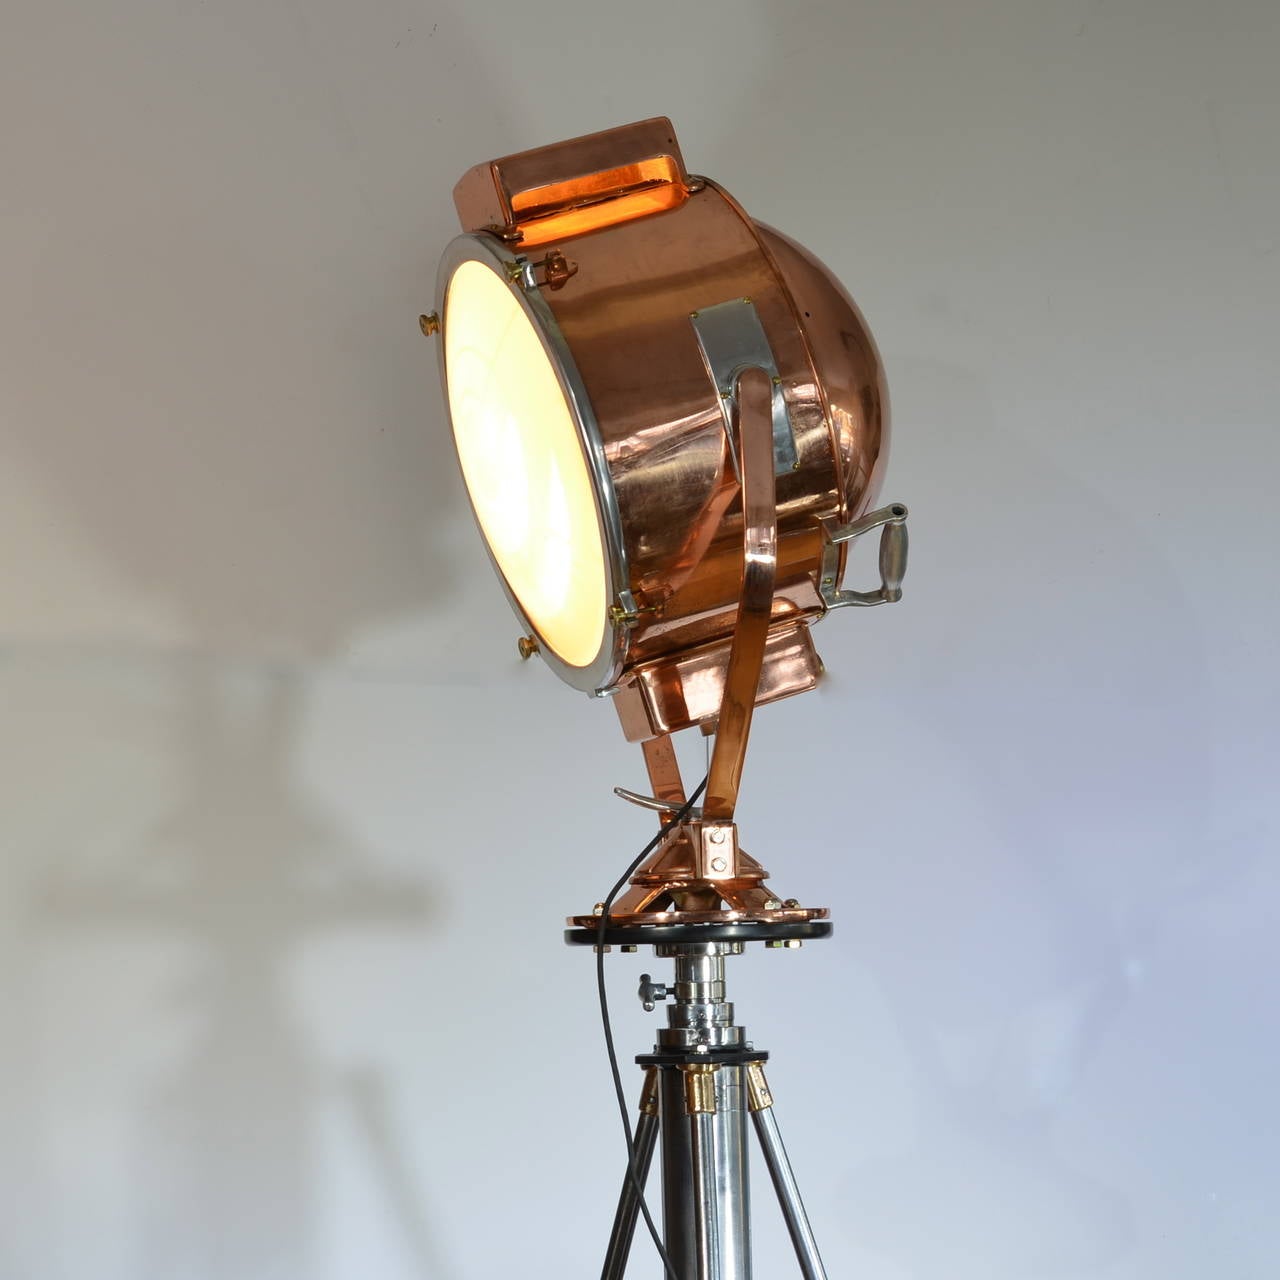 Incroyable tall ship lamp, could be at 7 feet to 12 feet tall. Steel and copper on tripod.